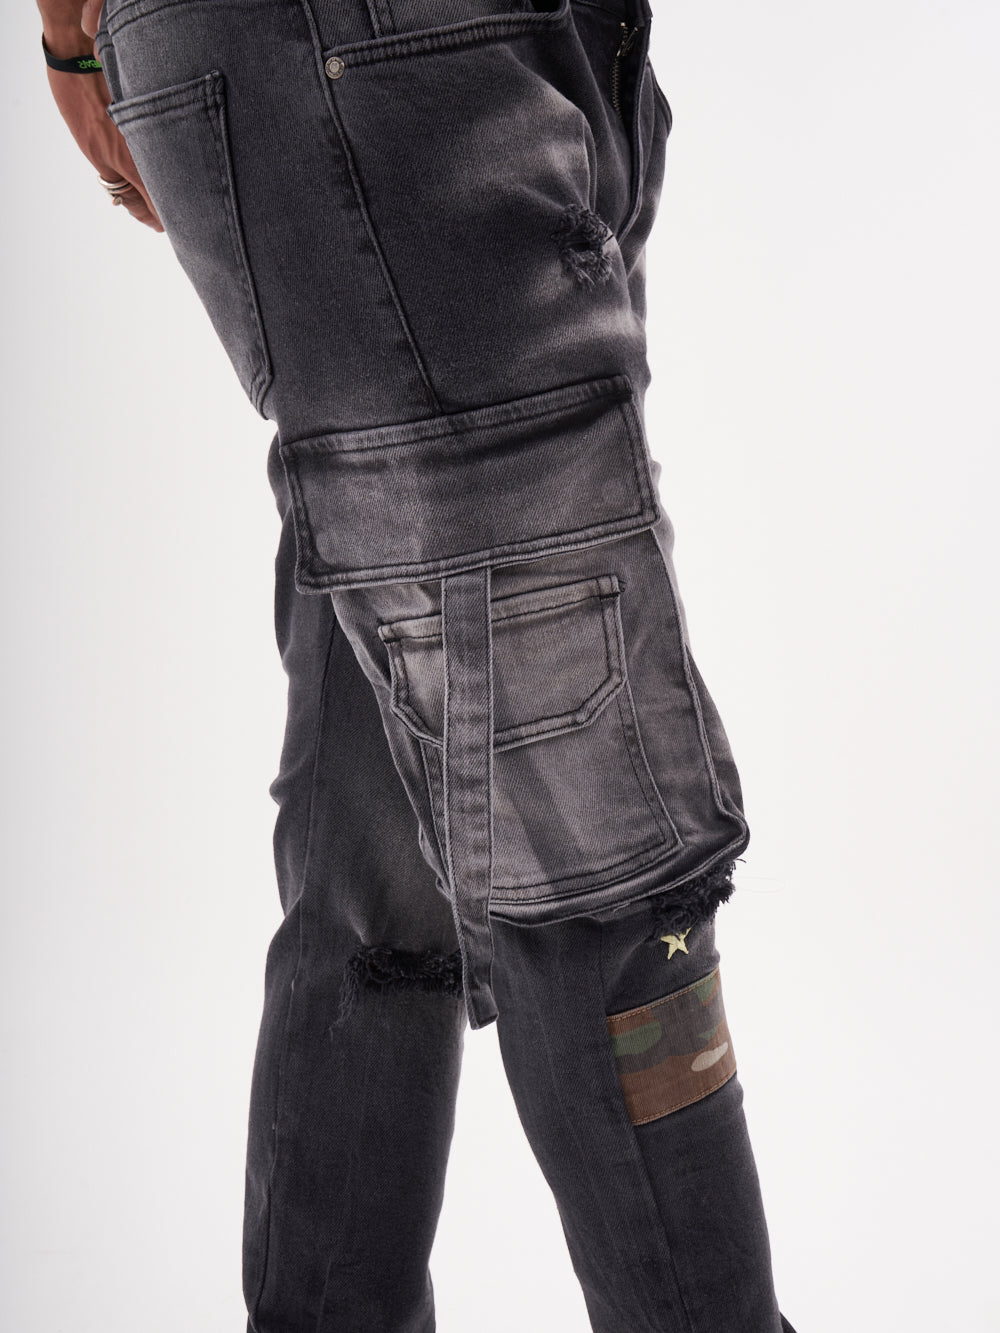 The back of a man wearing a pair of black HIPSTER cargo pants.